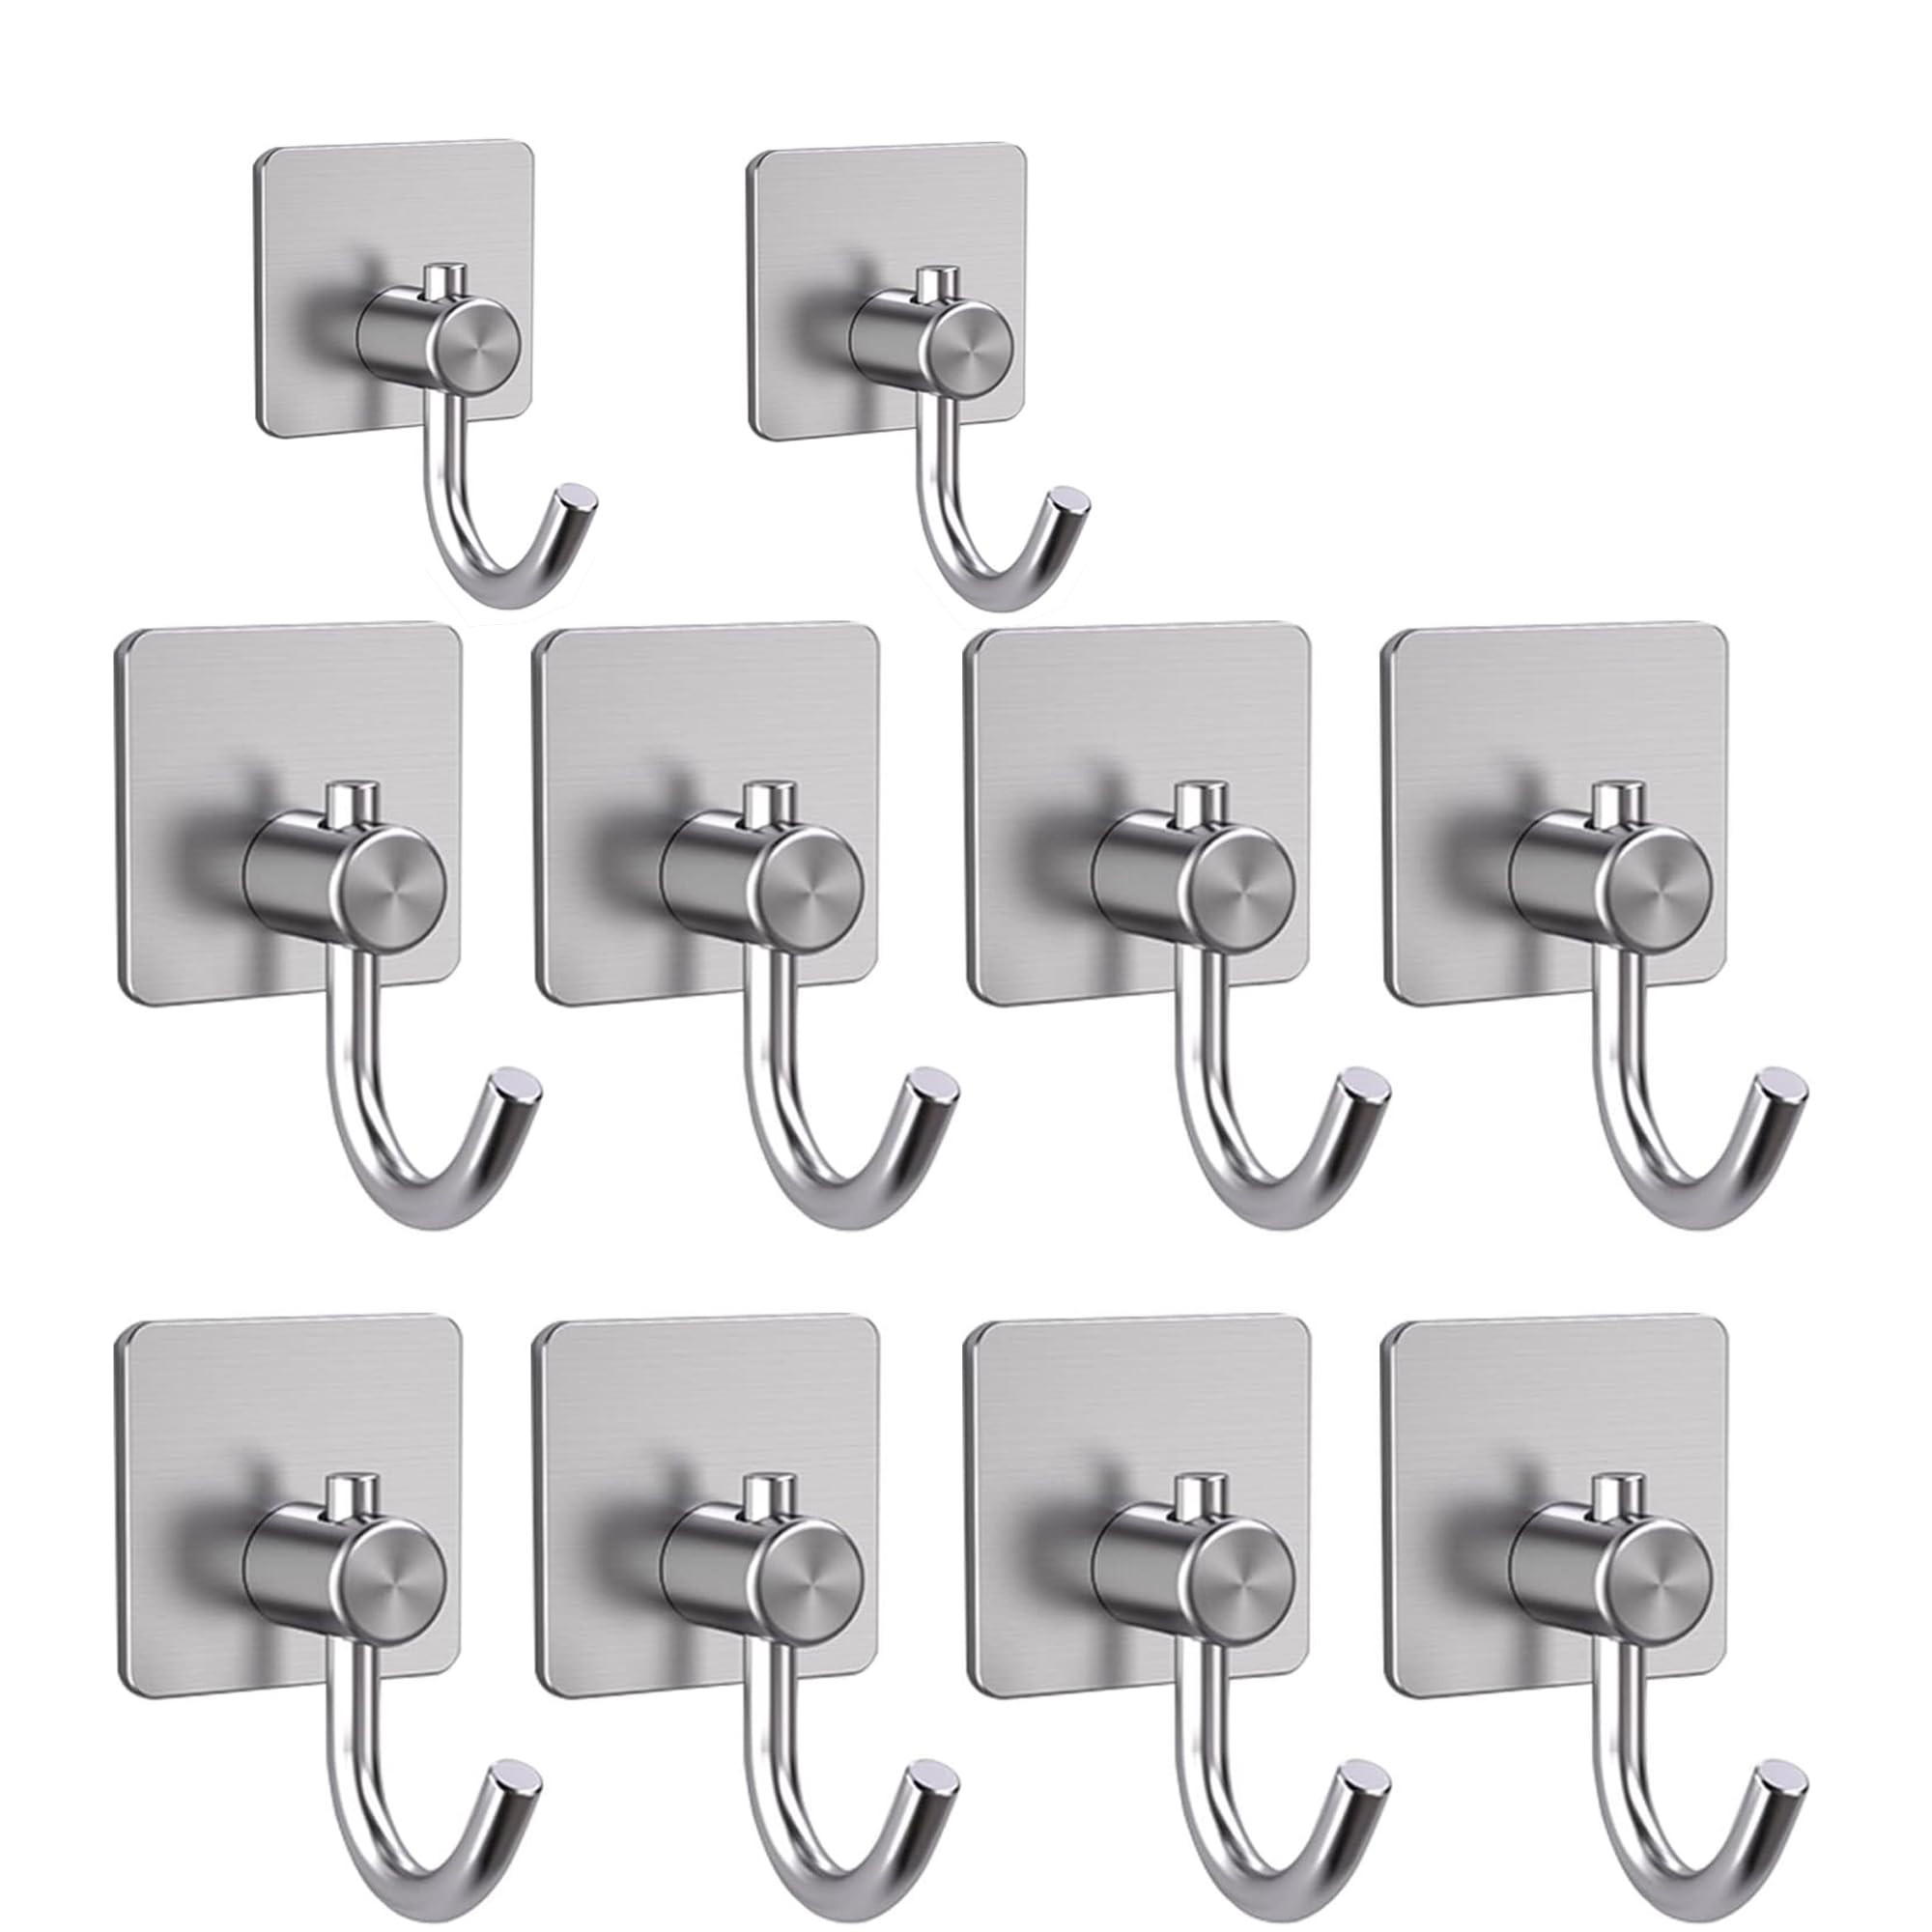 JIALTO 10 pcs Self-Adhesive Stainless Steel Hooks: Heavy-Duty Wall Hanging  Solution for Bathroom 